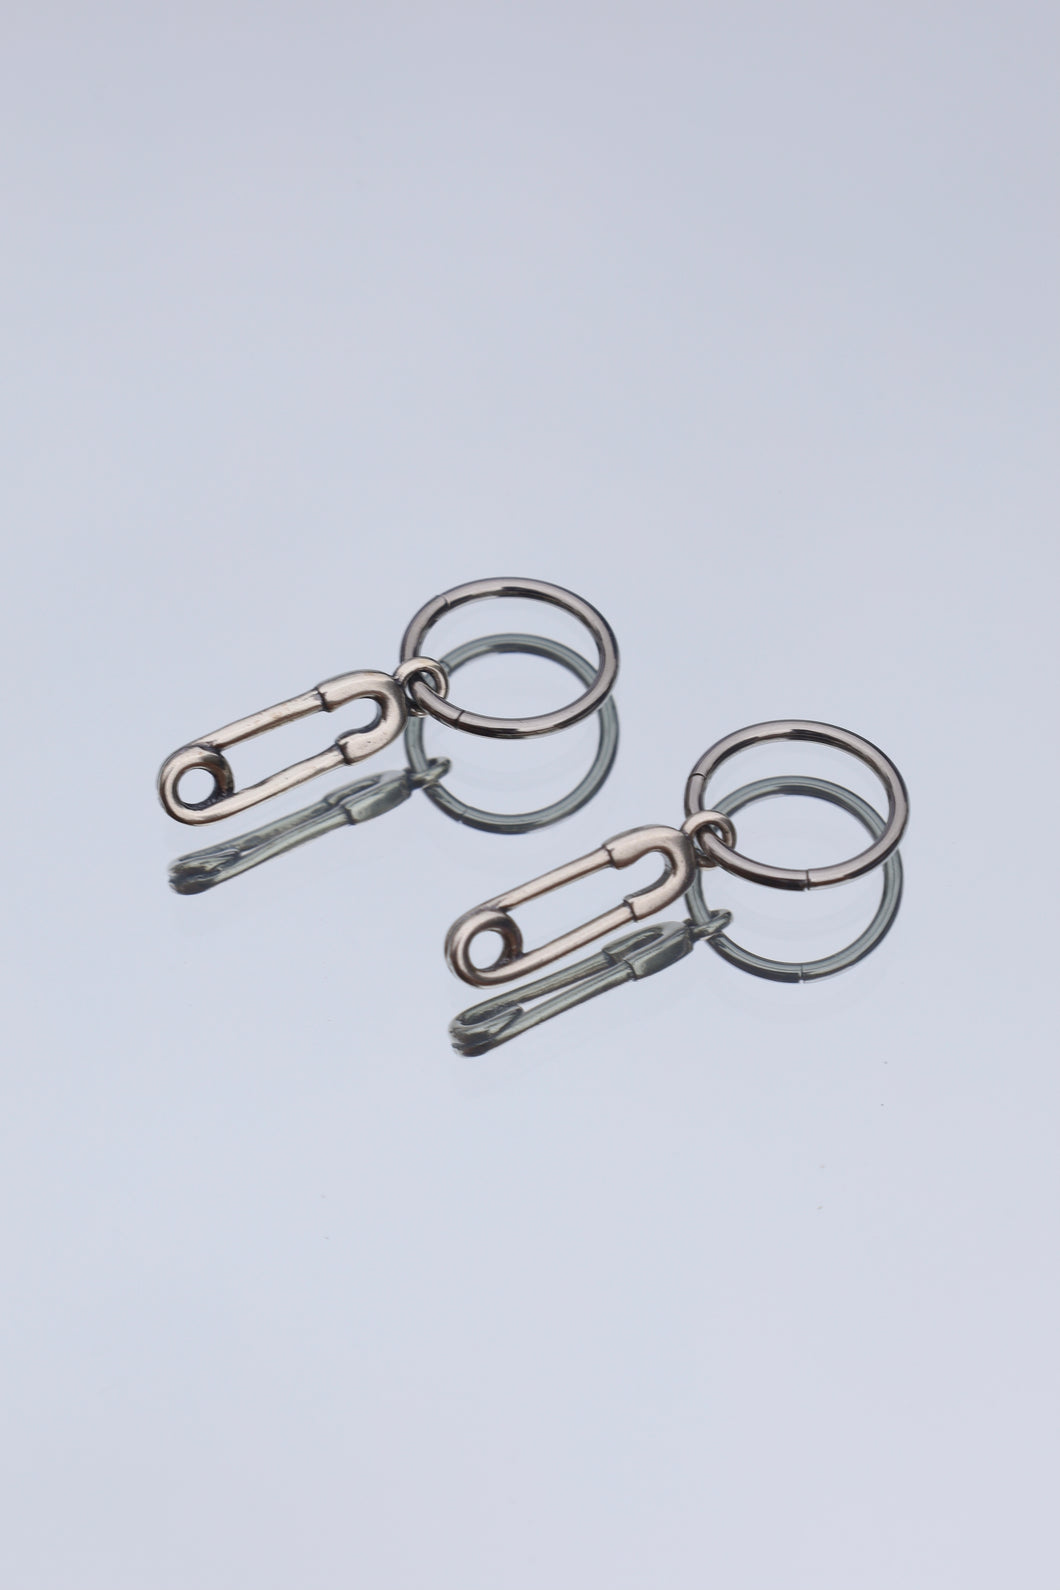 Baby Safety Pin Hoops